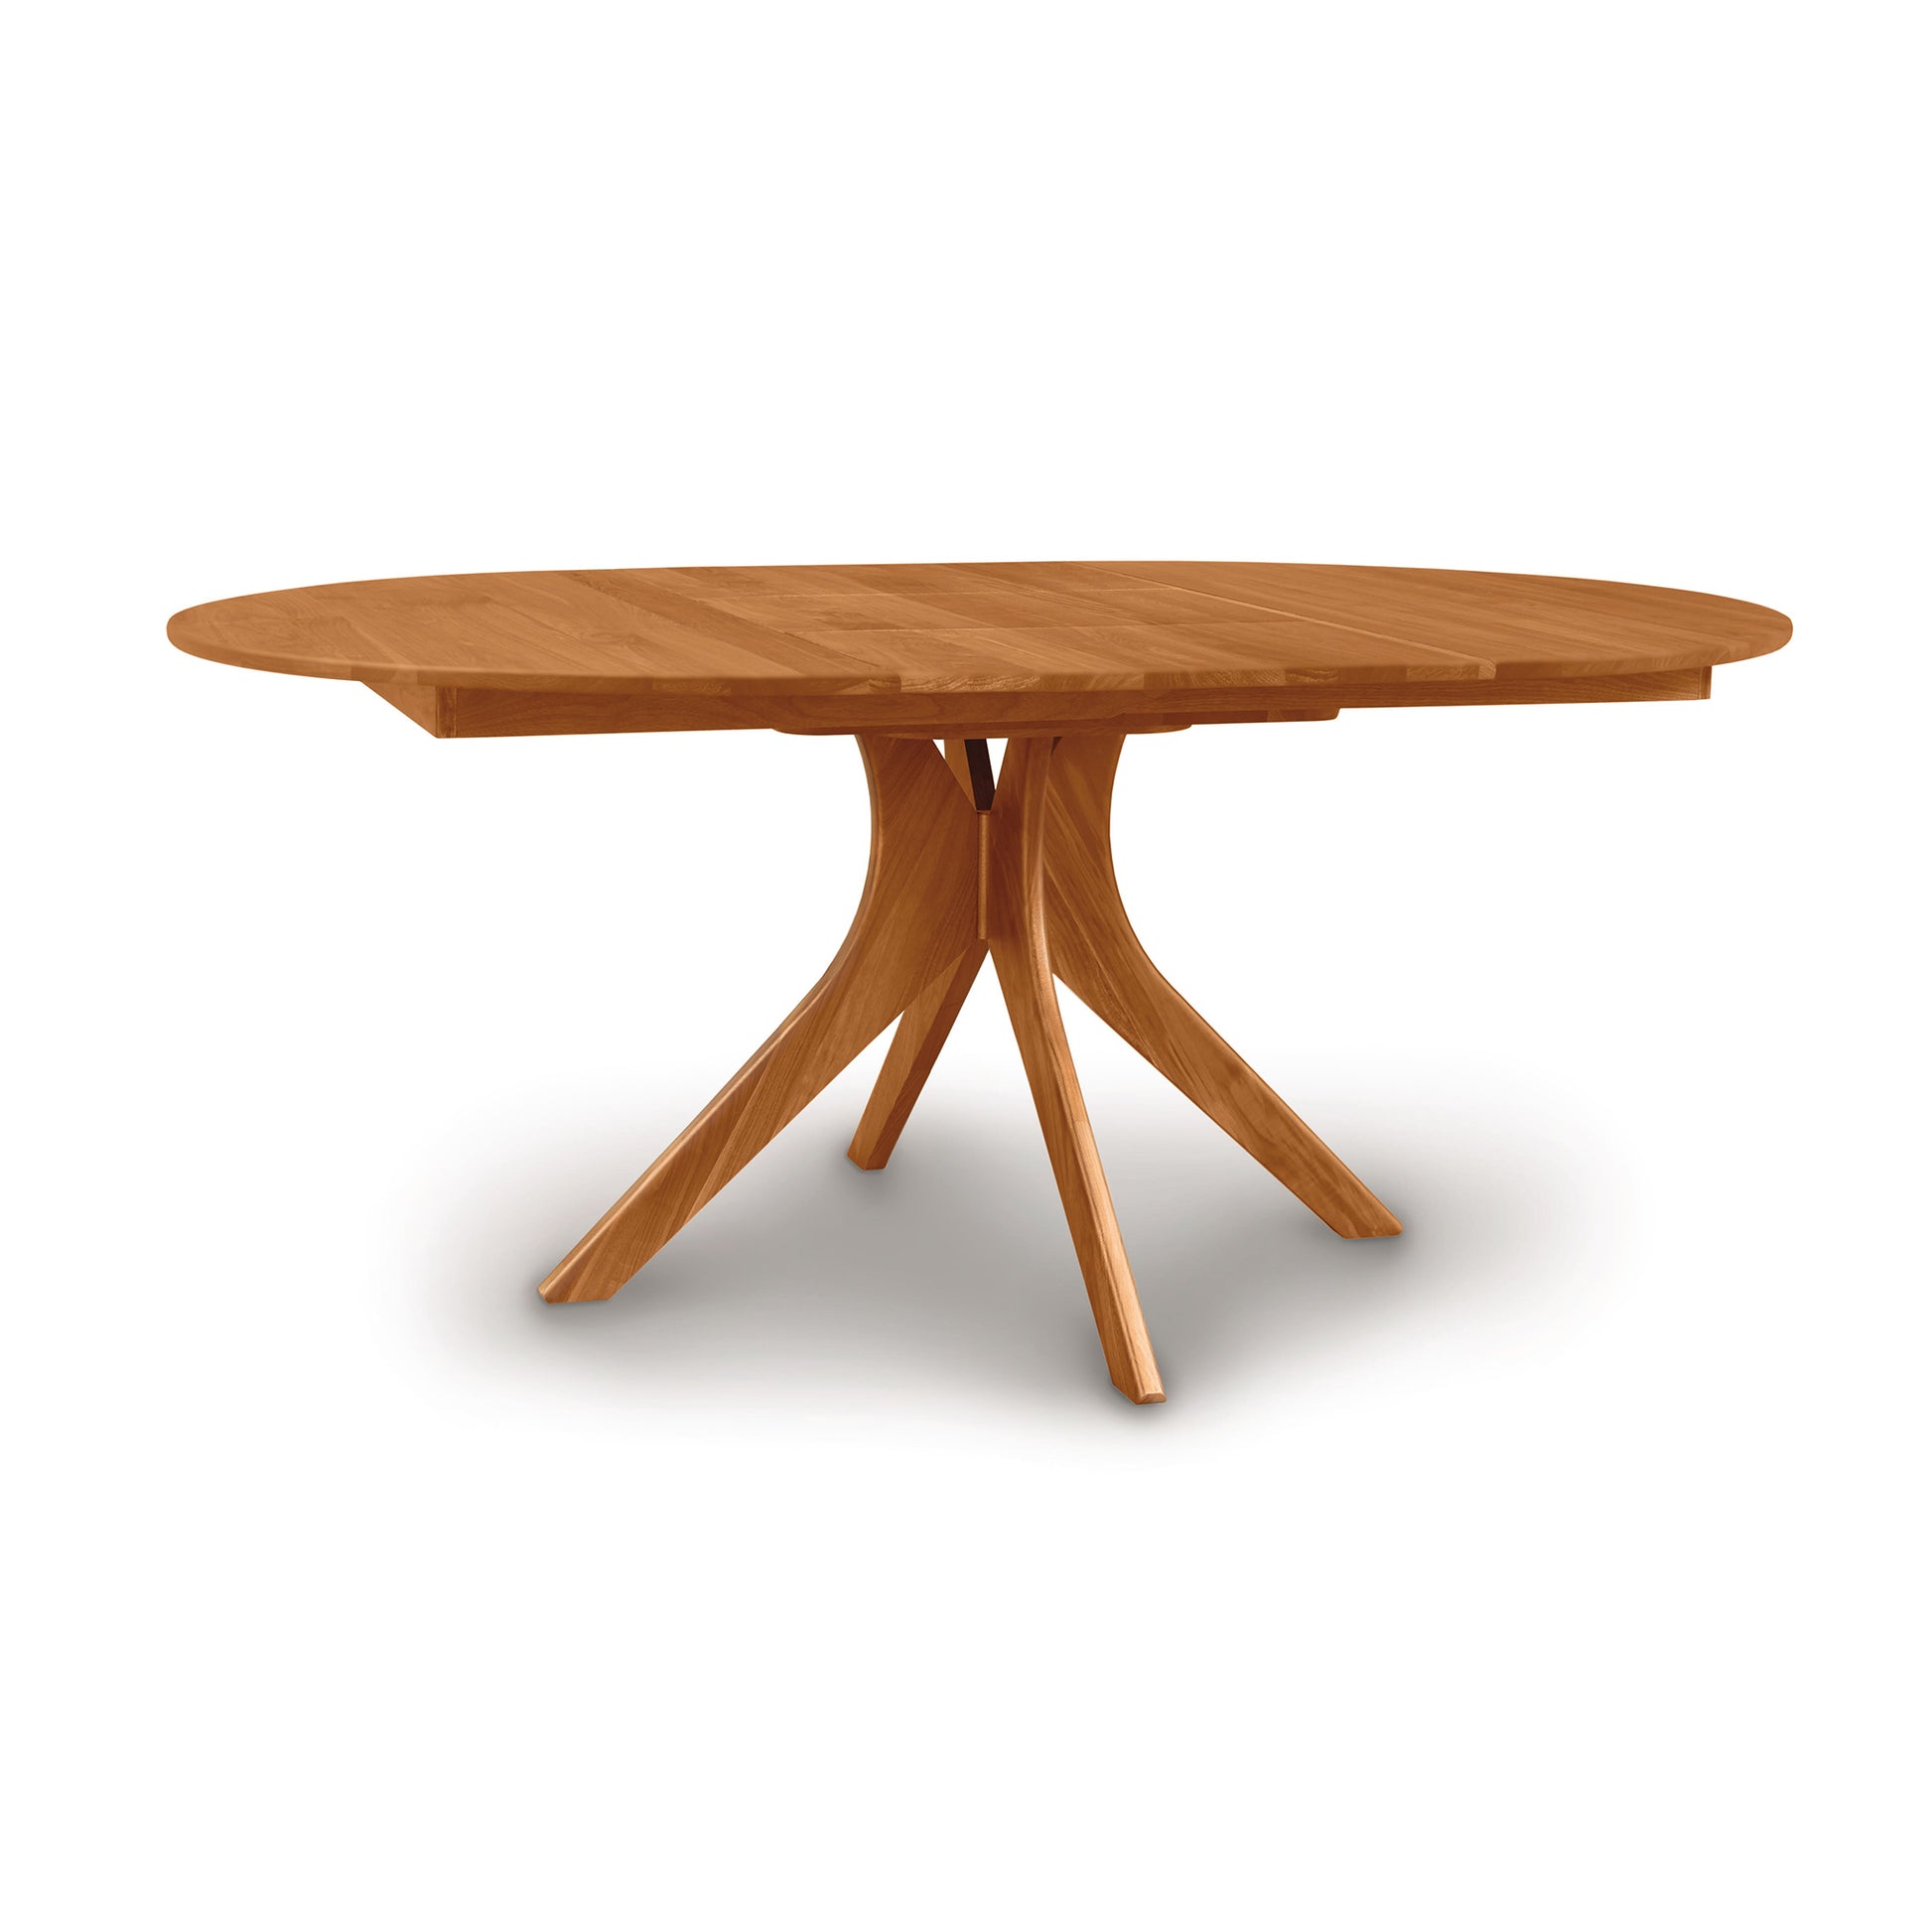 An Audrey Round Extension Dining Table by Copeland Furniture with a star-shaped base, isolated on a white background.